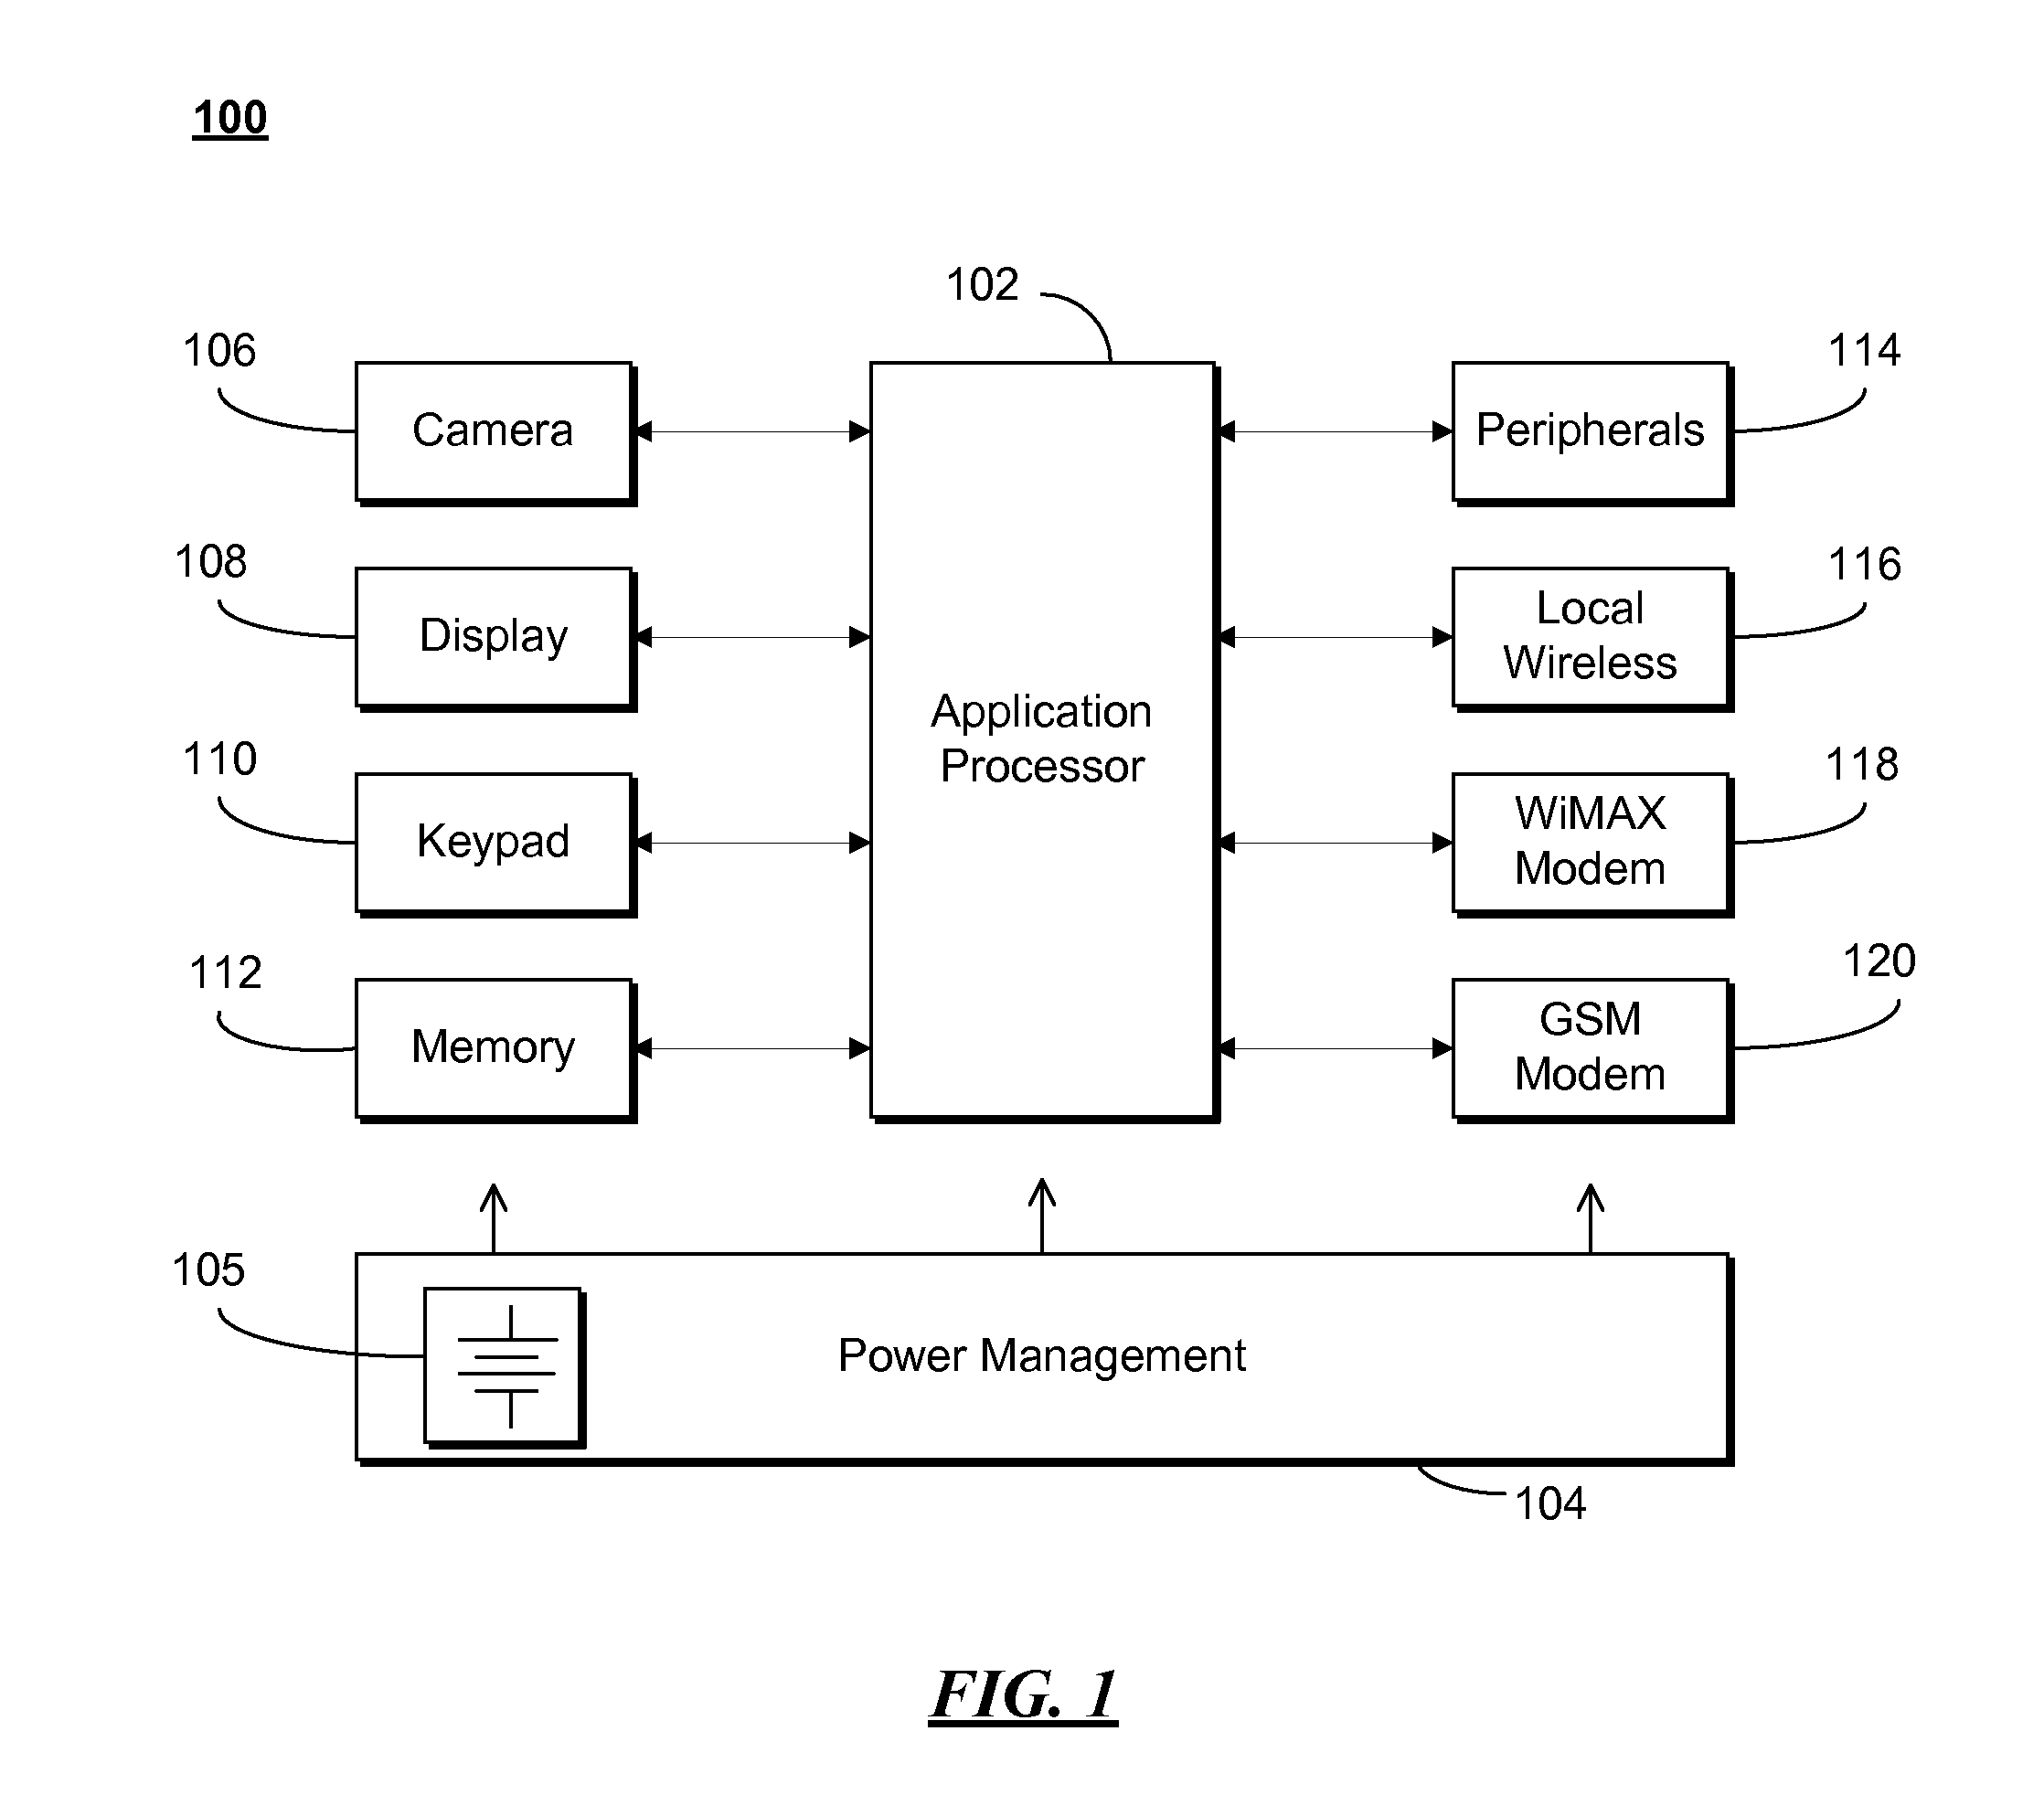 Method and apparatus for controlling power among modems in a multi-mode mobile communication device